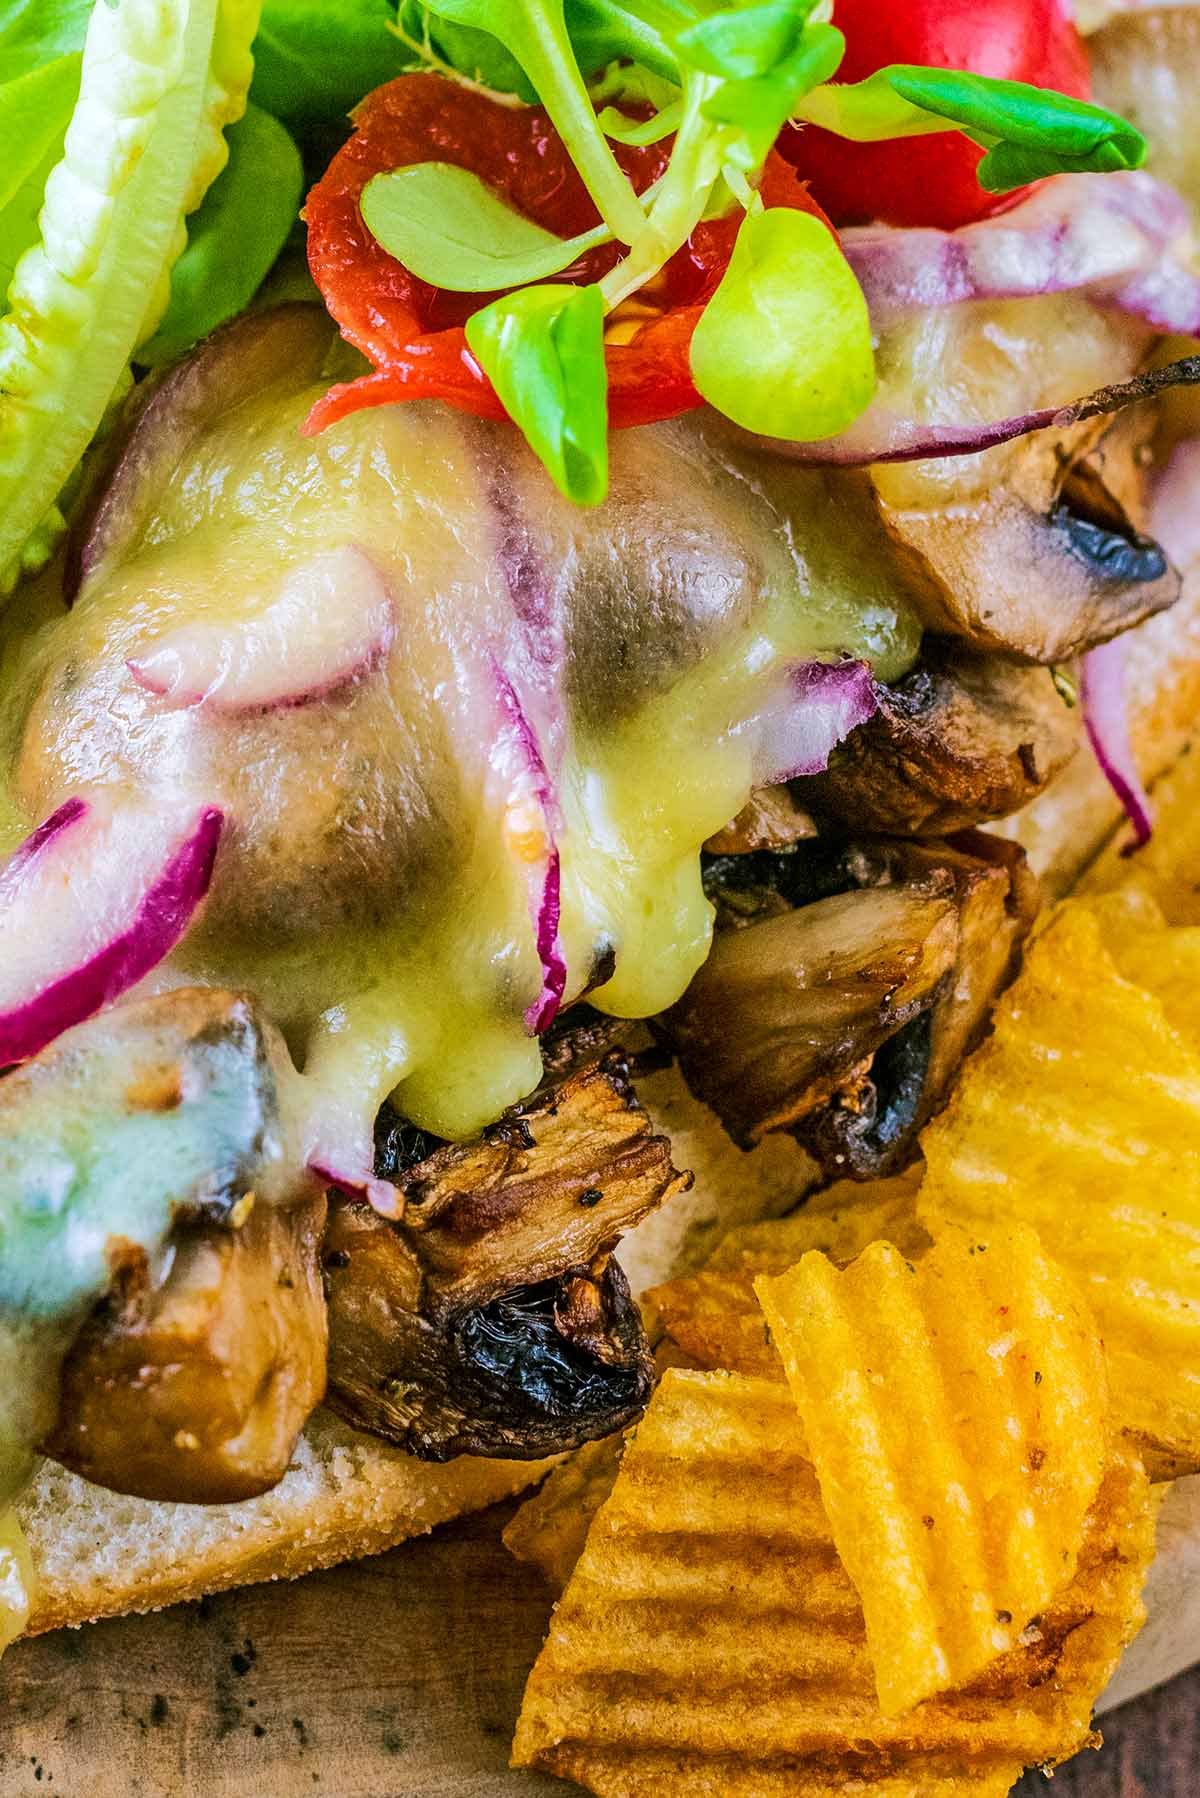 Melted cheese dripping down some cooked mushrooms in a sandwich.